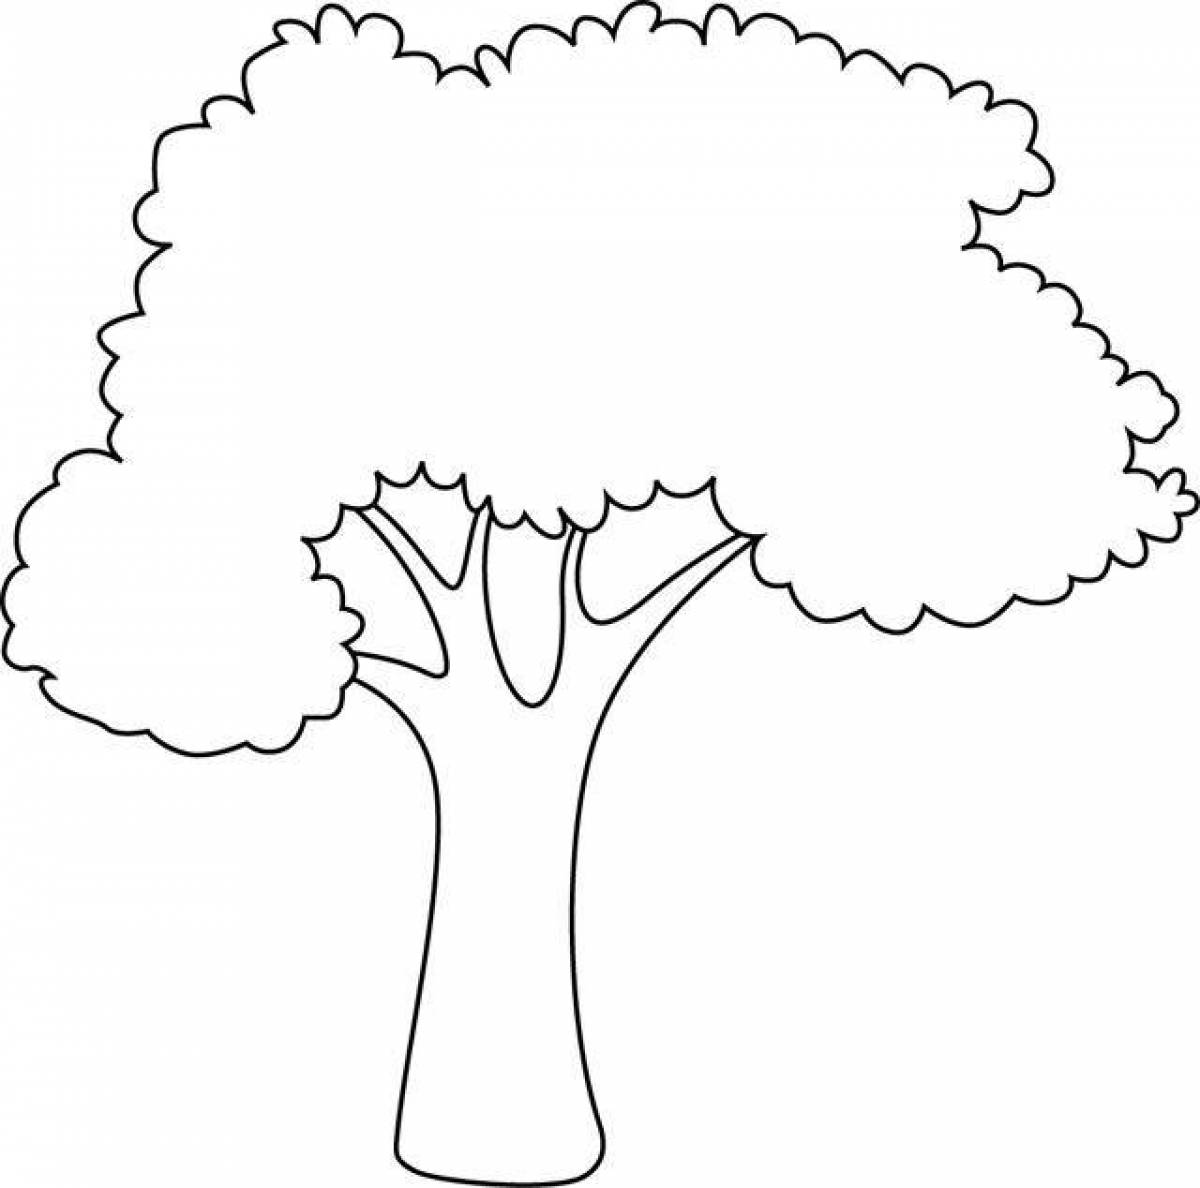 Colorful scene tree coloring page for kids